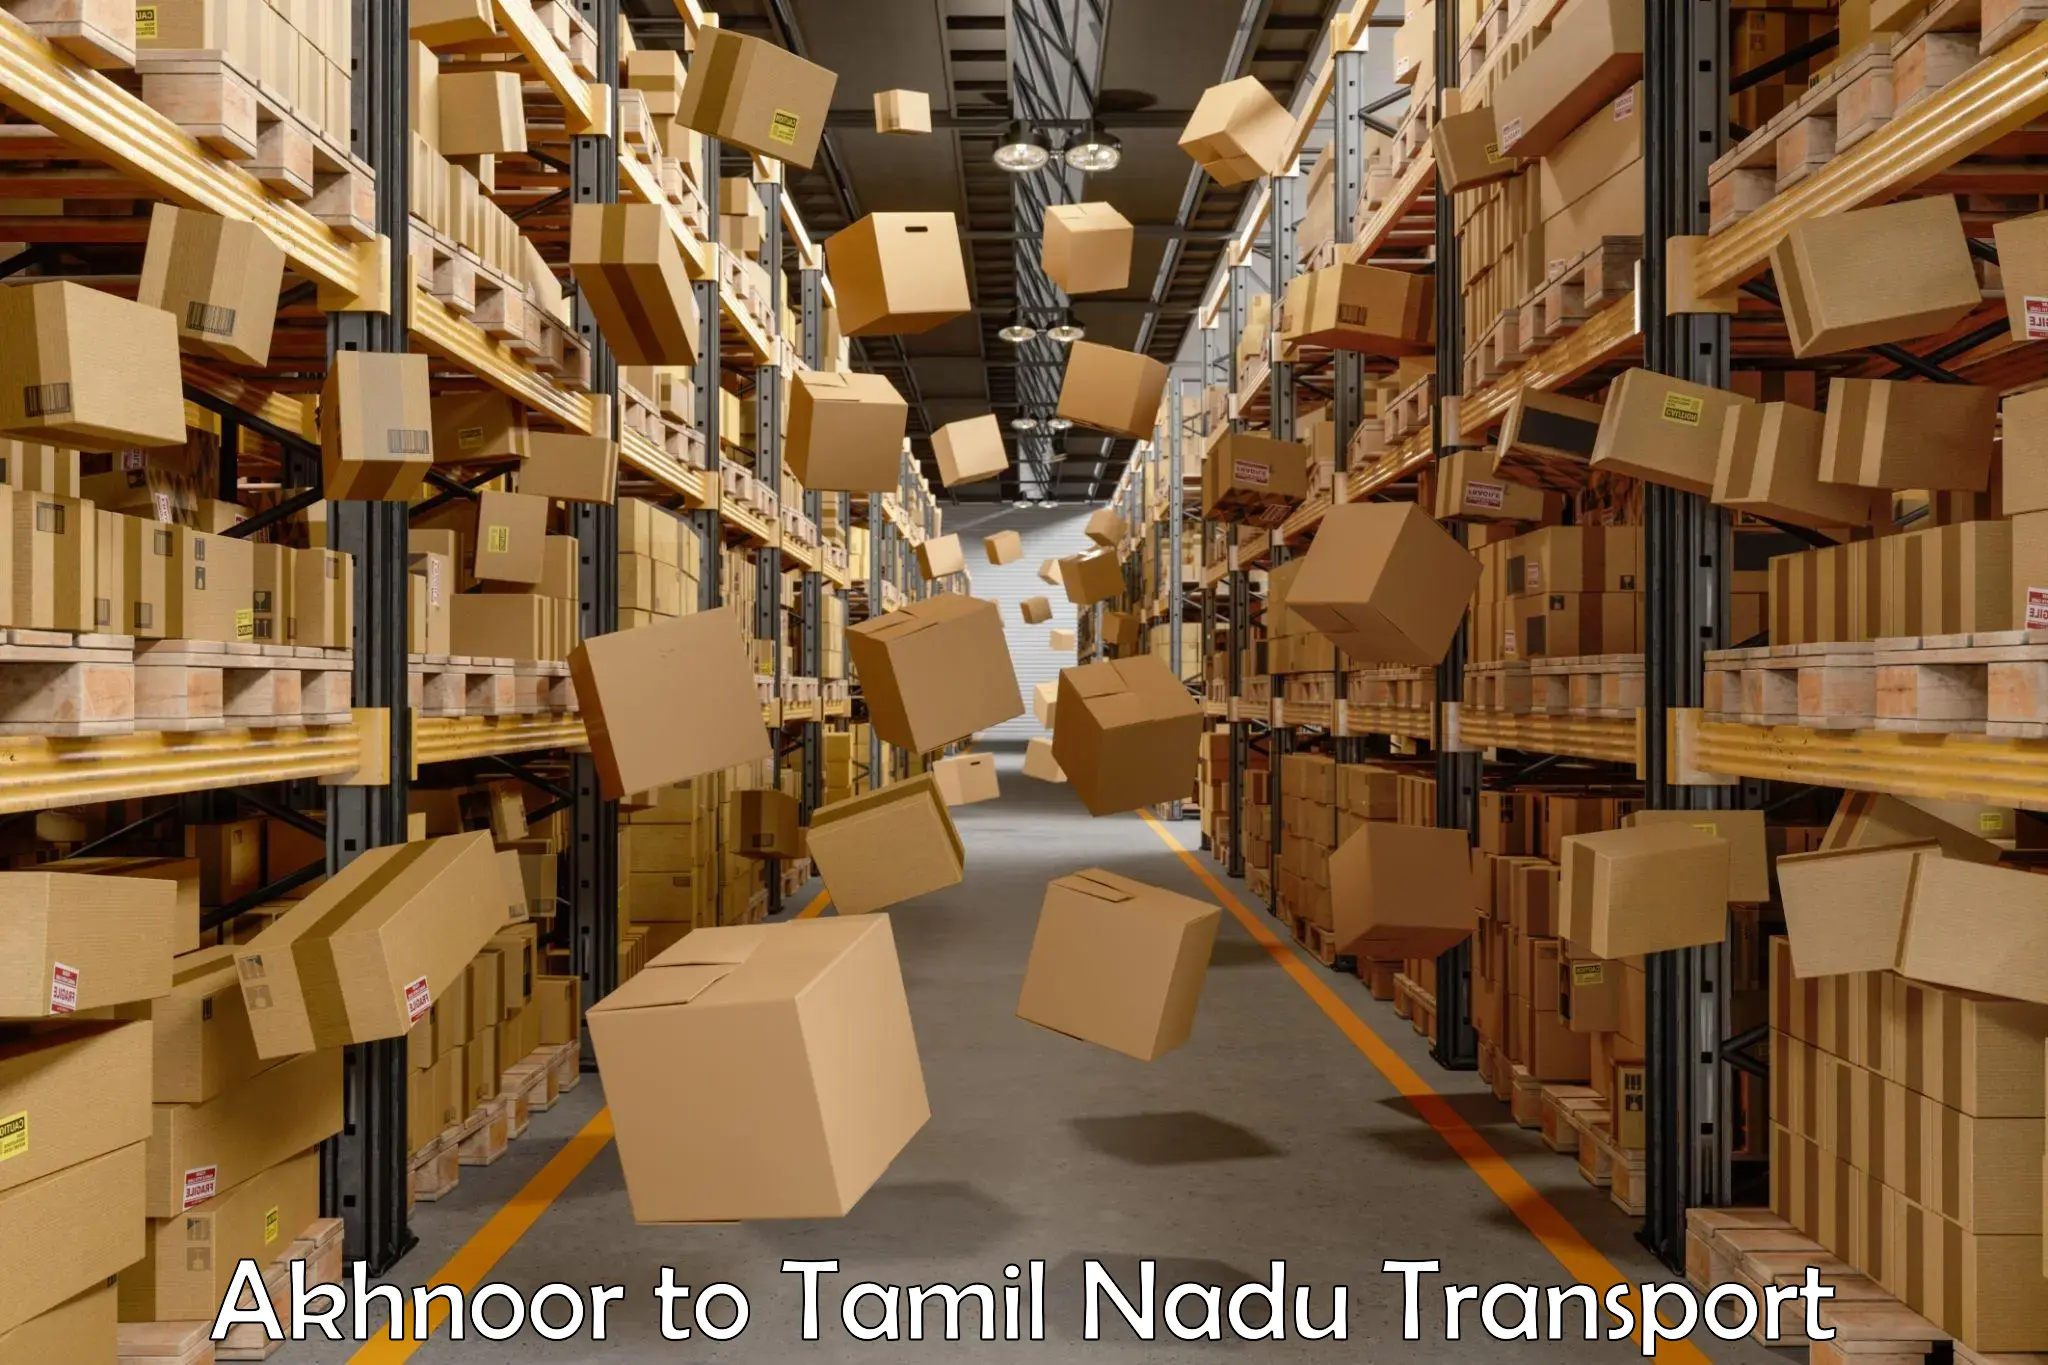 Parcel transport services Akhnoor to Vellore Institute of Technology